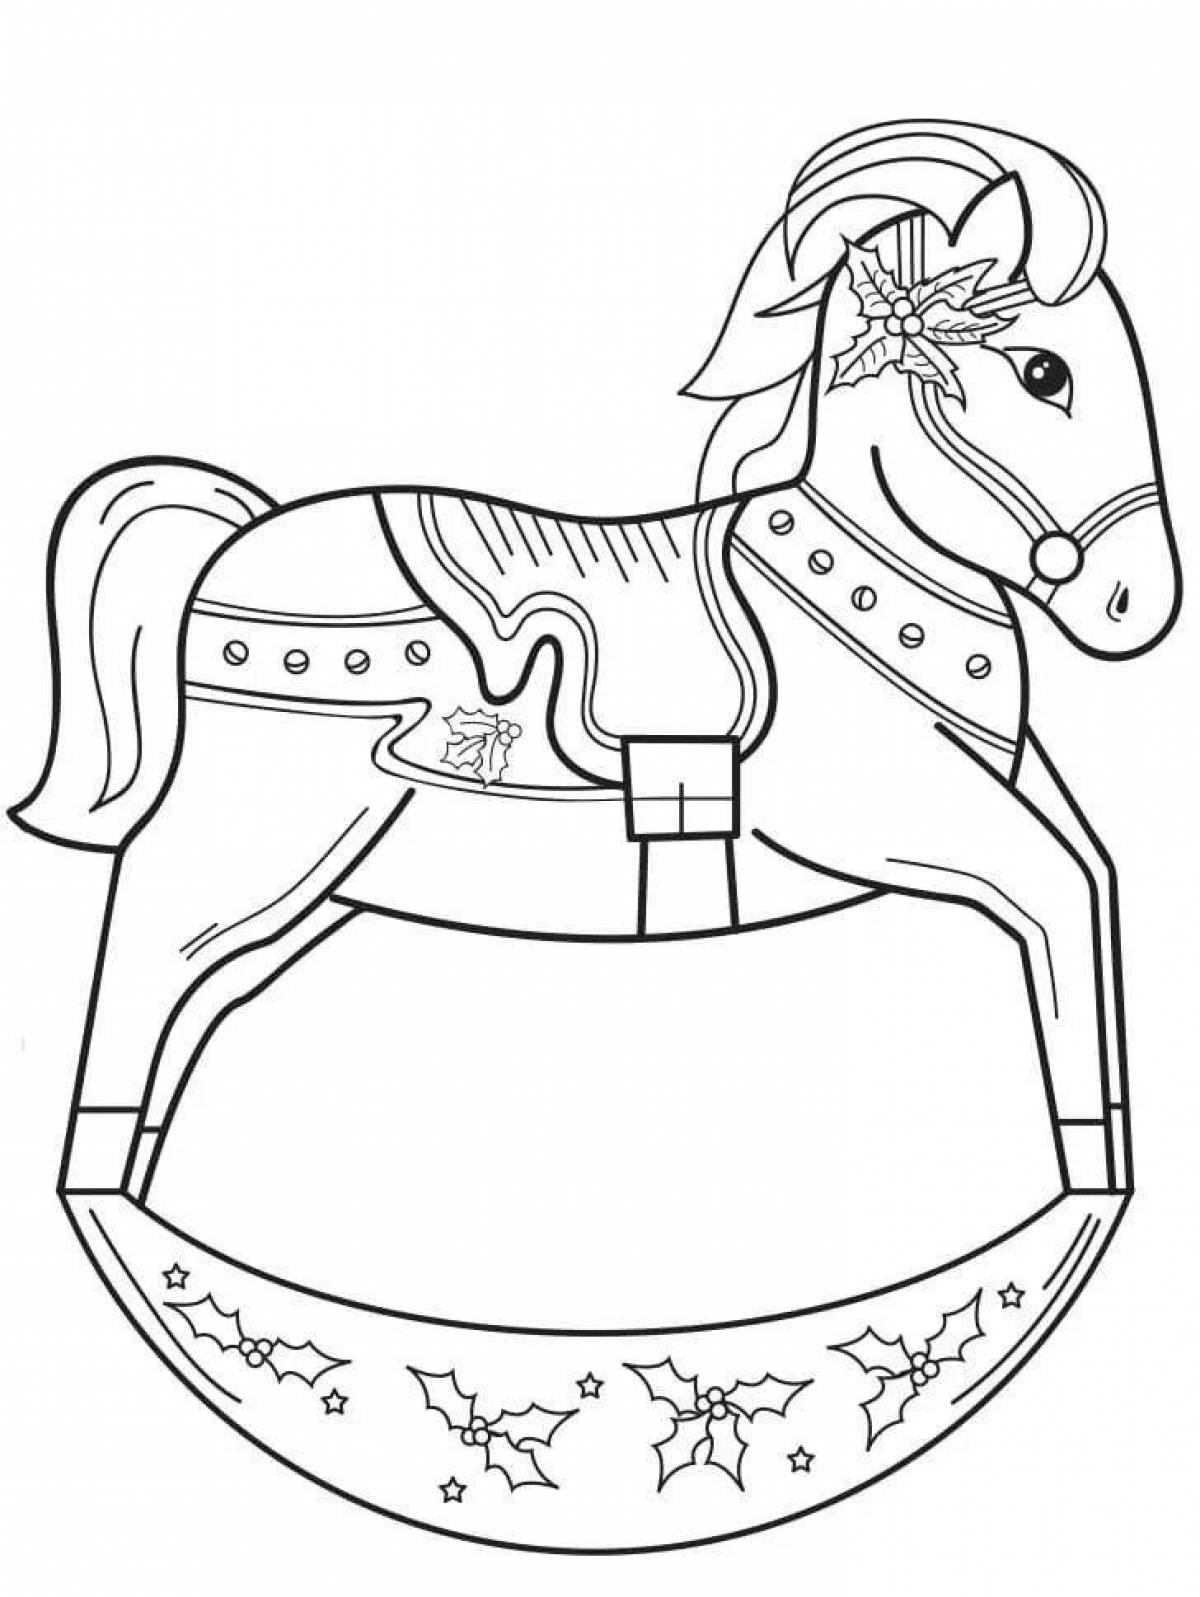 Coloring page gorgeous rocking horse